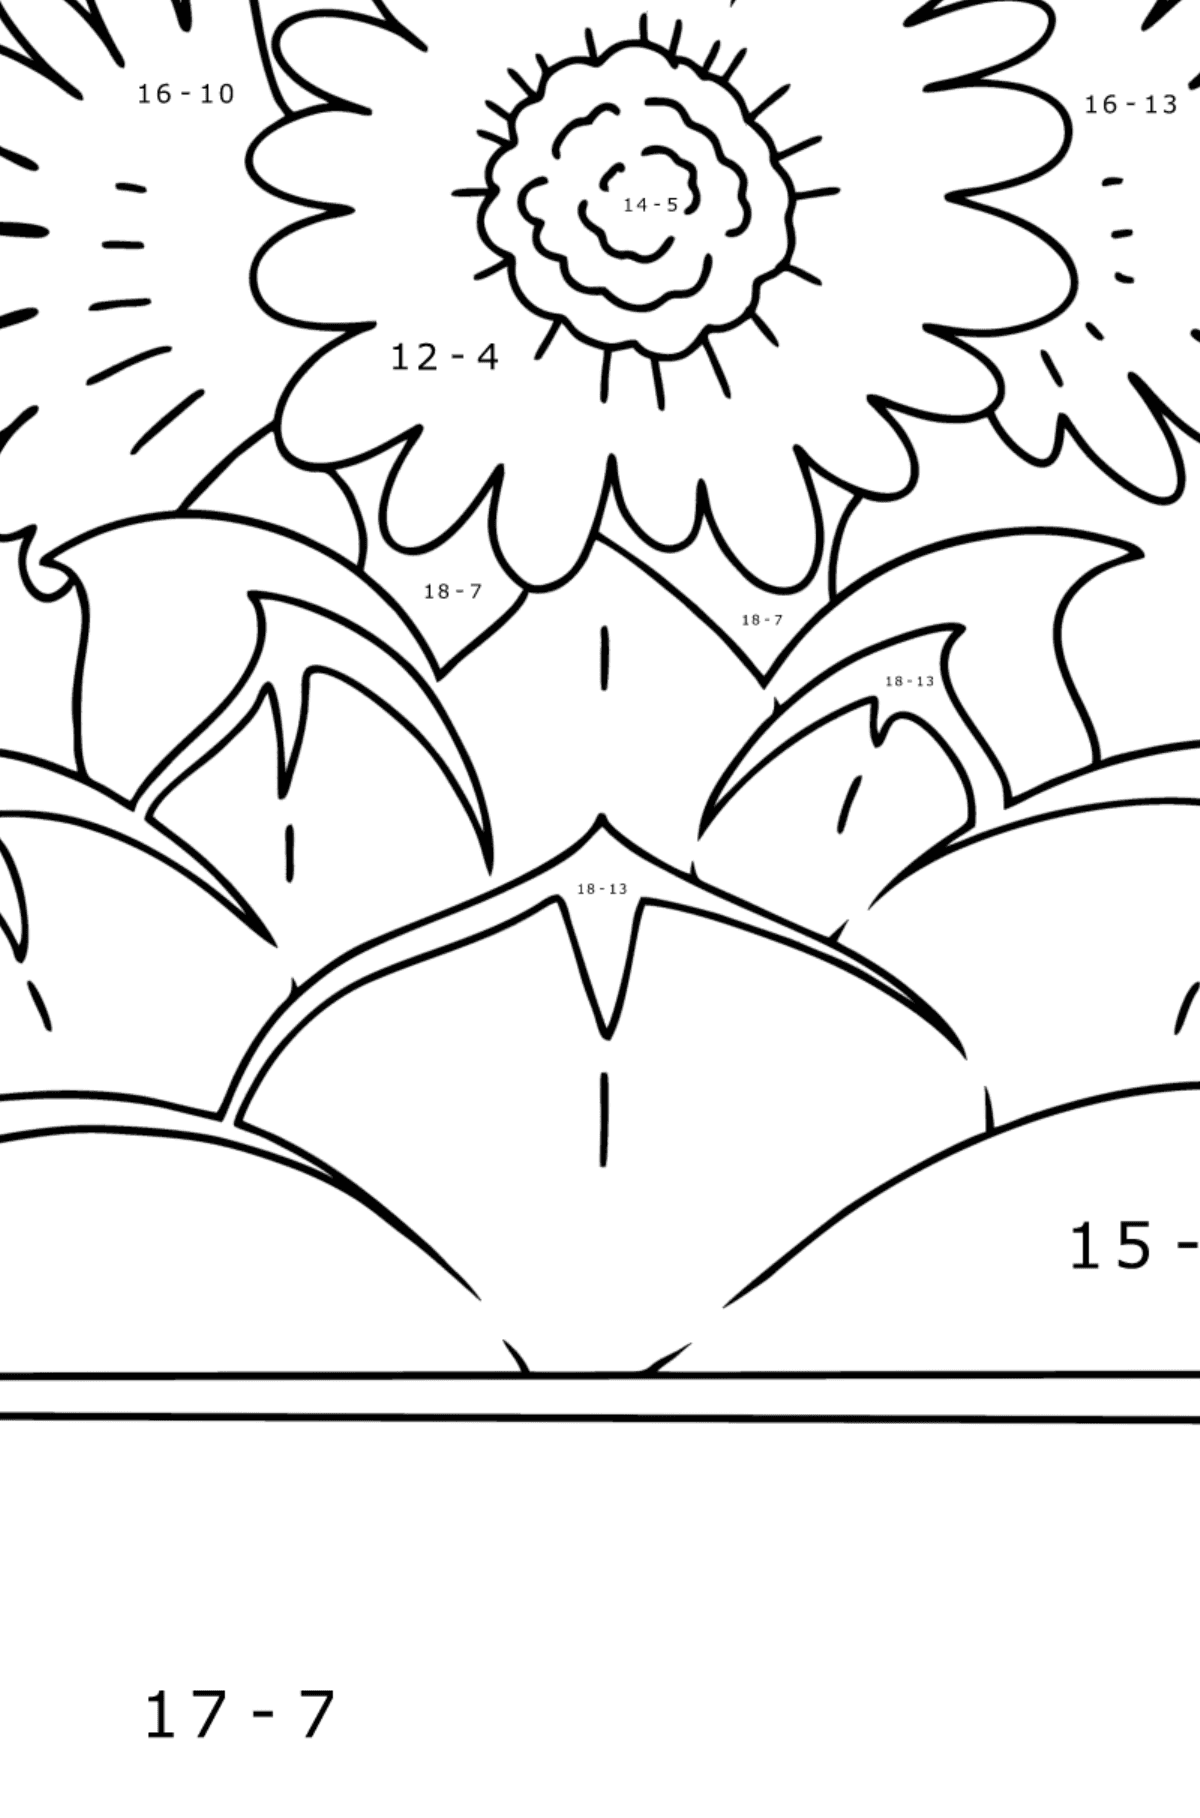 Echinocactus Grusonii coloring page - Math Coloring - Subtraction for Kids